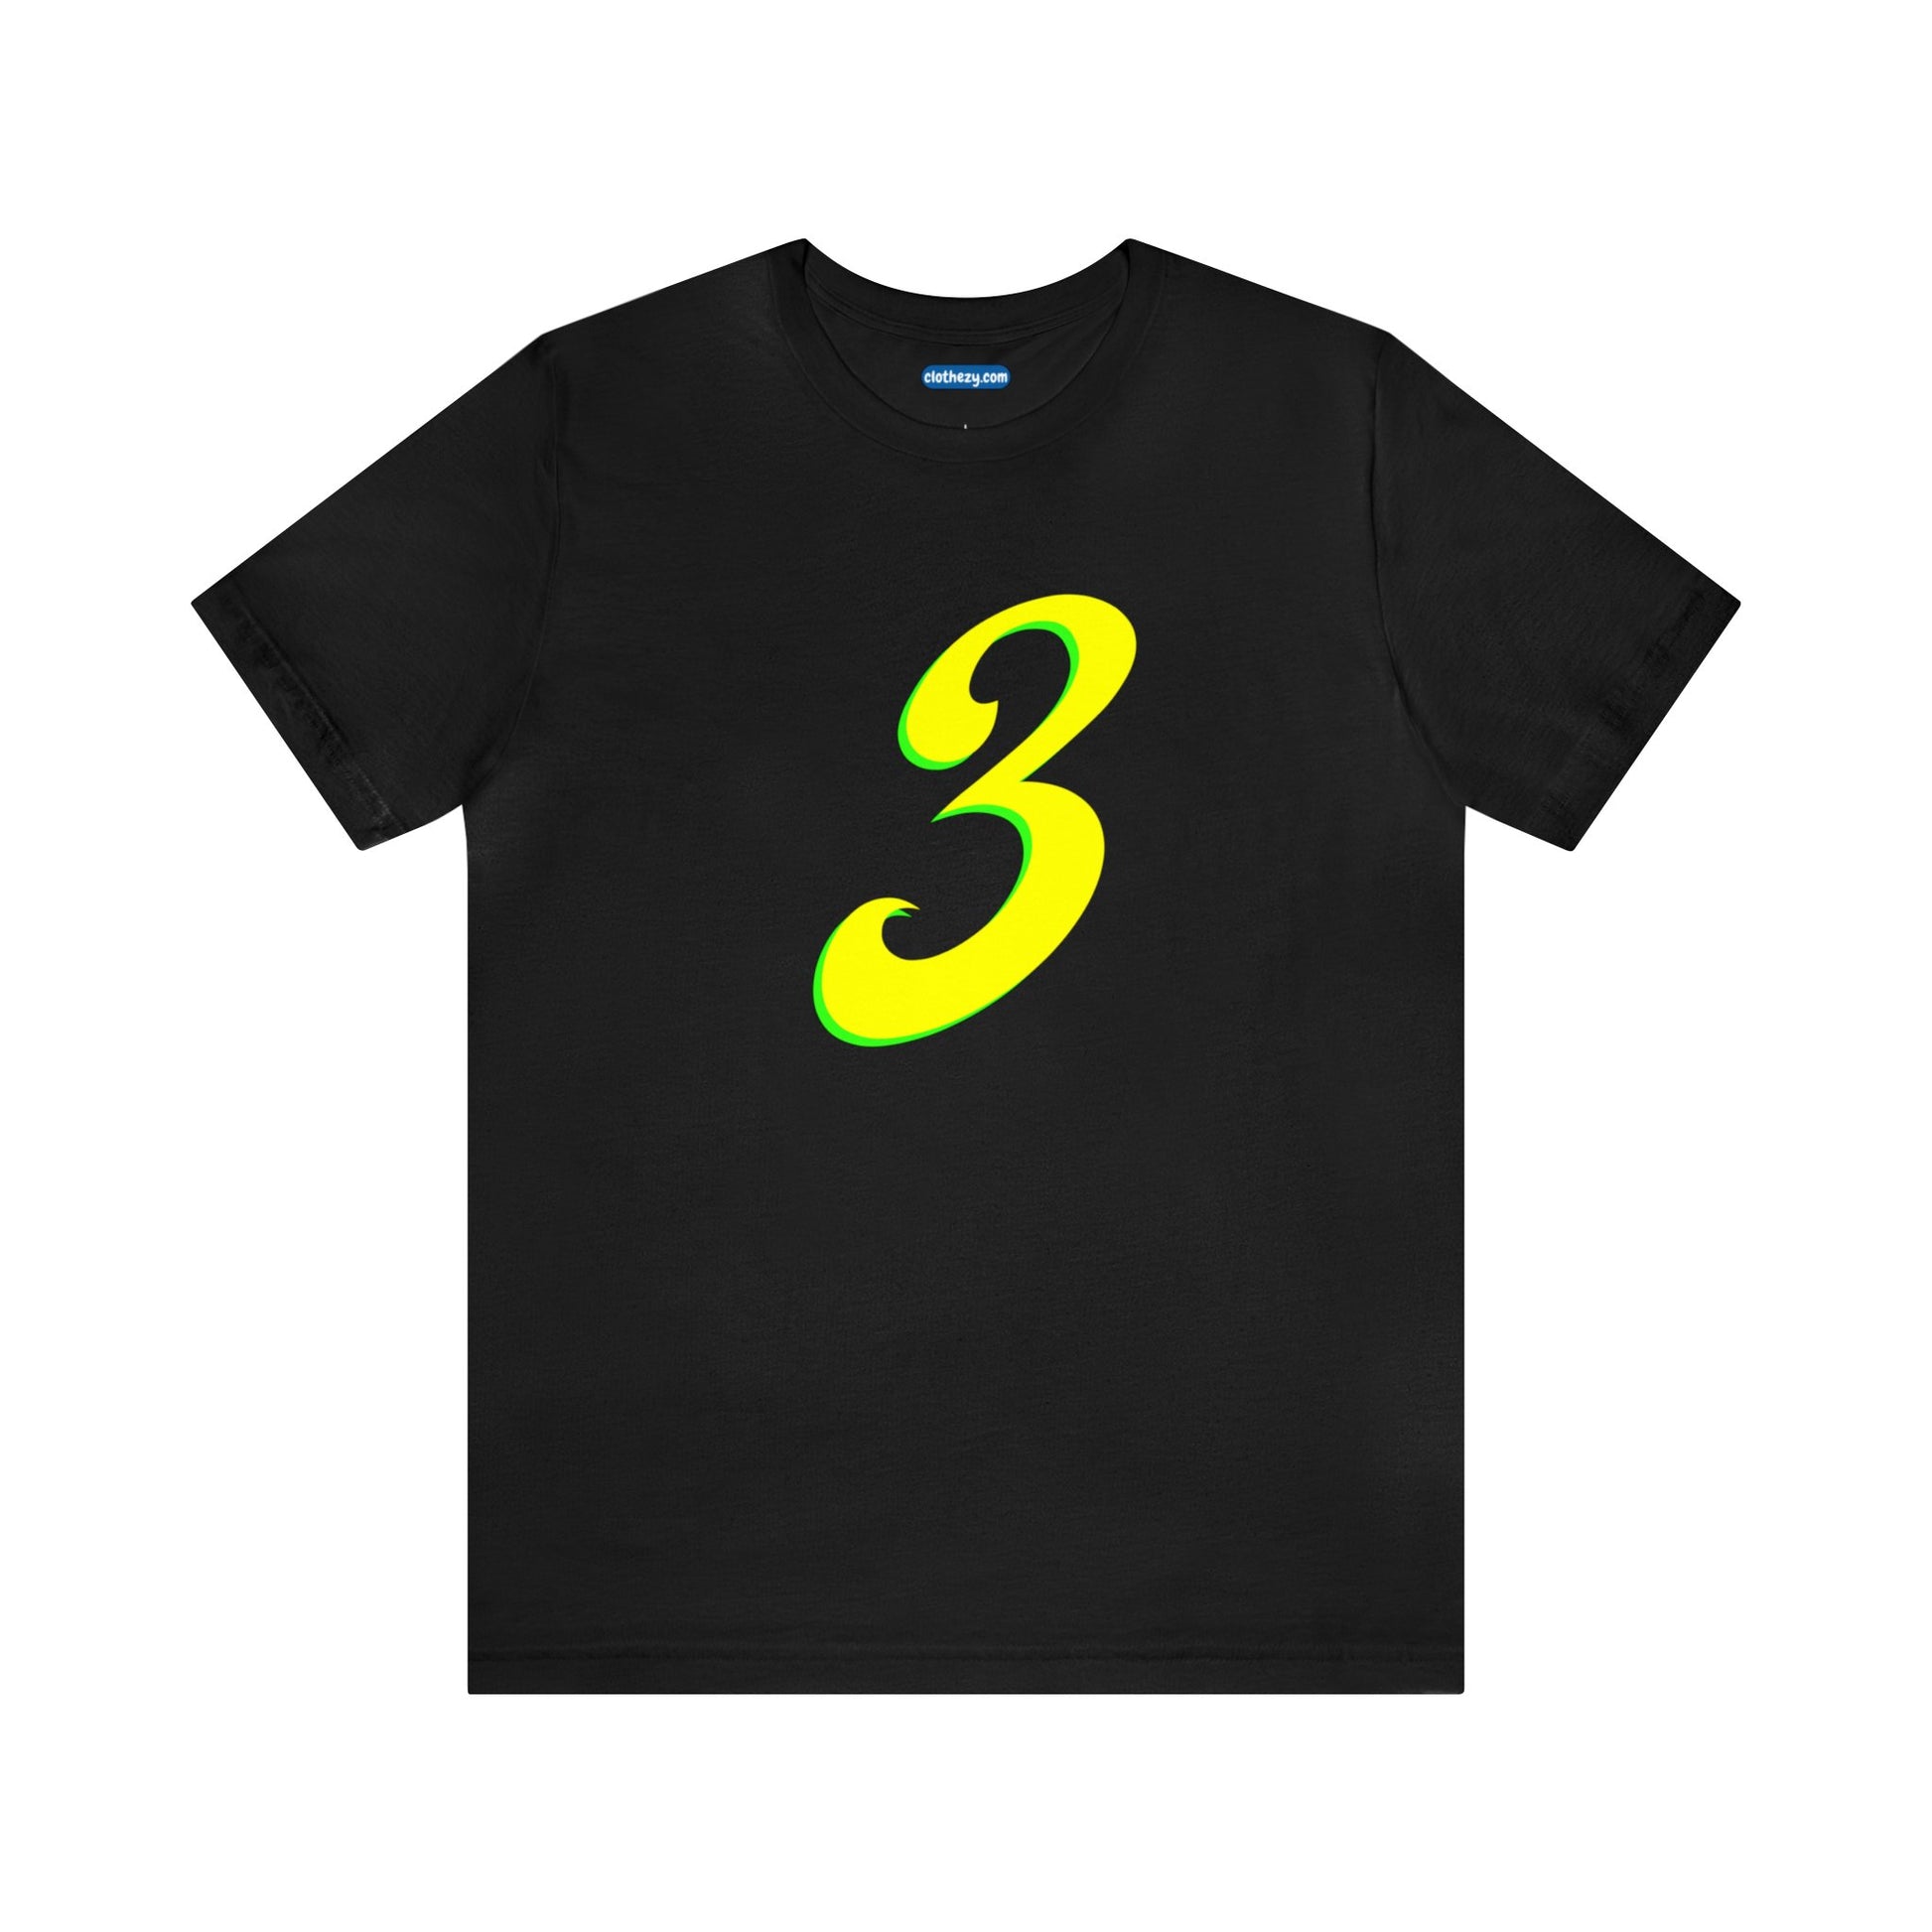 Number 3 Design - Soft Cotton Tee for birthdays and celebrations, Gift for friends and family, Multiple Options by clothezy.com in Dark Grey Heather Size Small - Buy Now